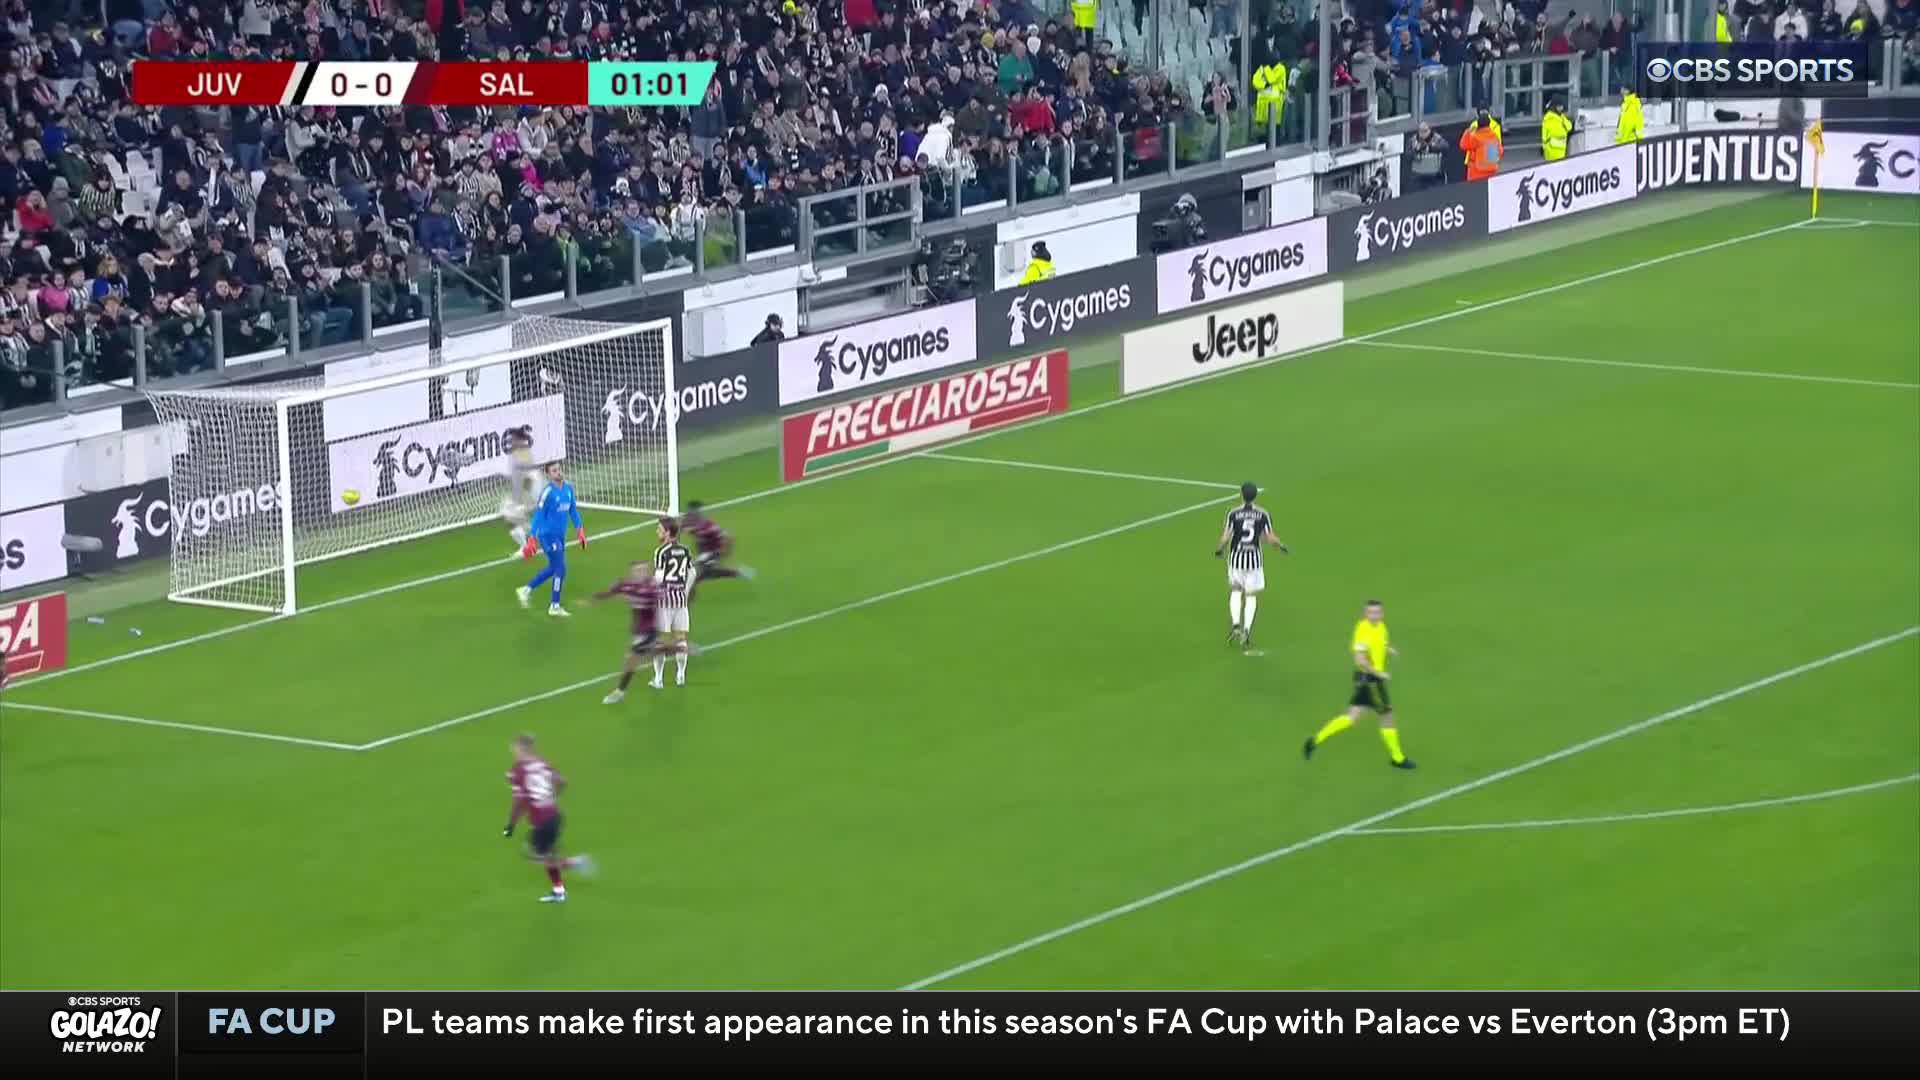 SALERNITANA IN UNDER A MINUTE AGAINST JUVENTUS! 😱Calamitous at the back from The Old Lady. 😳